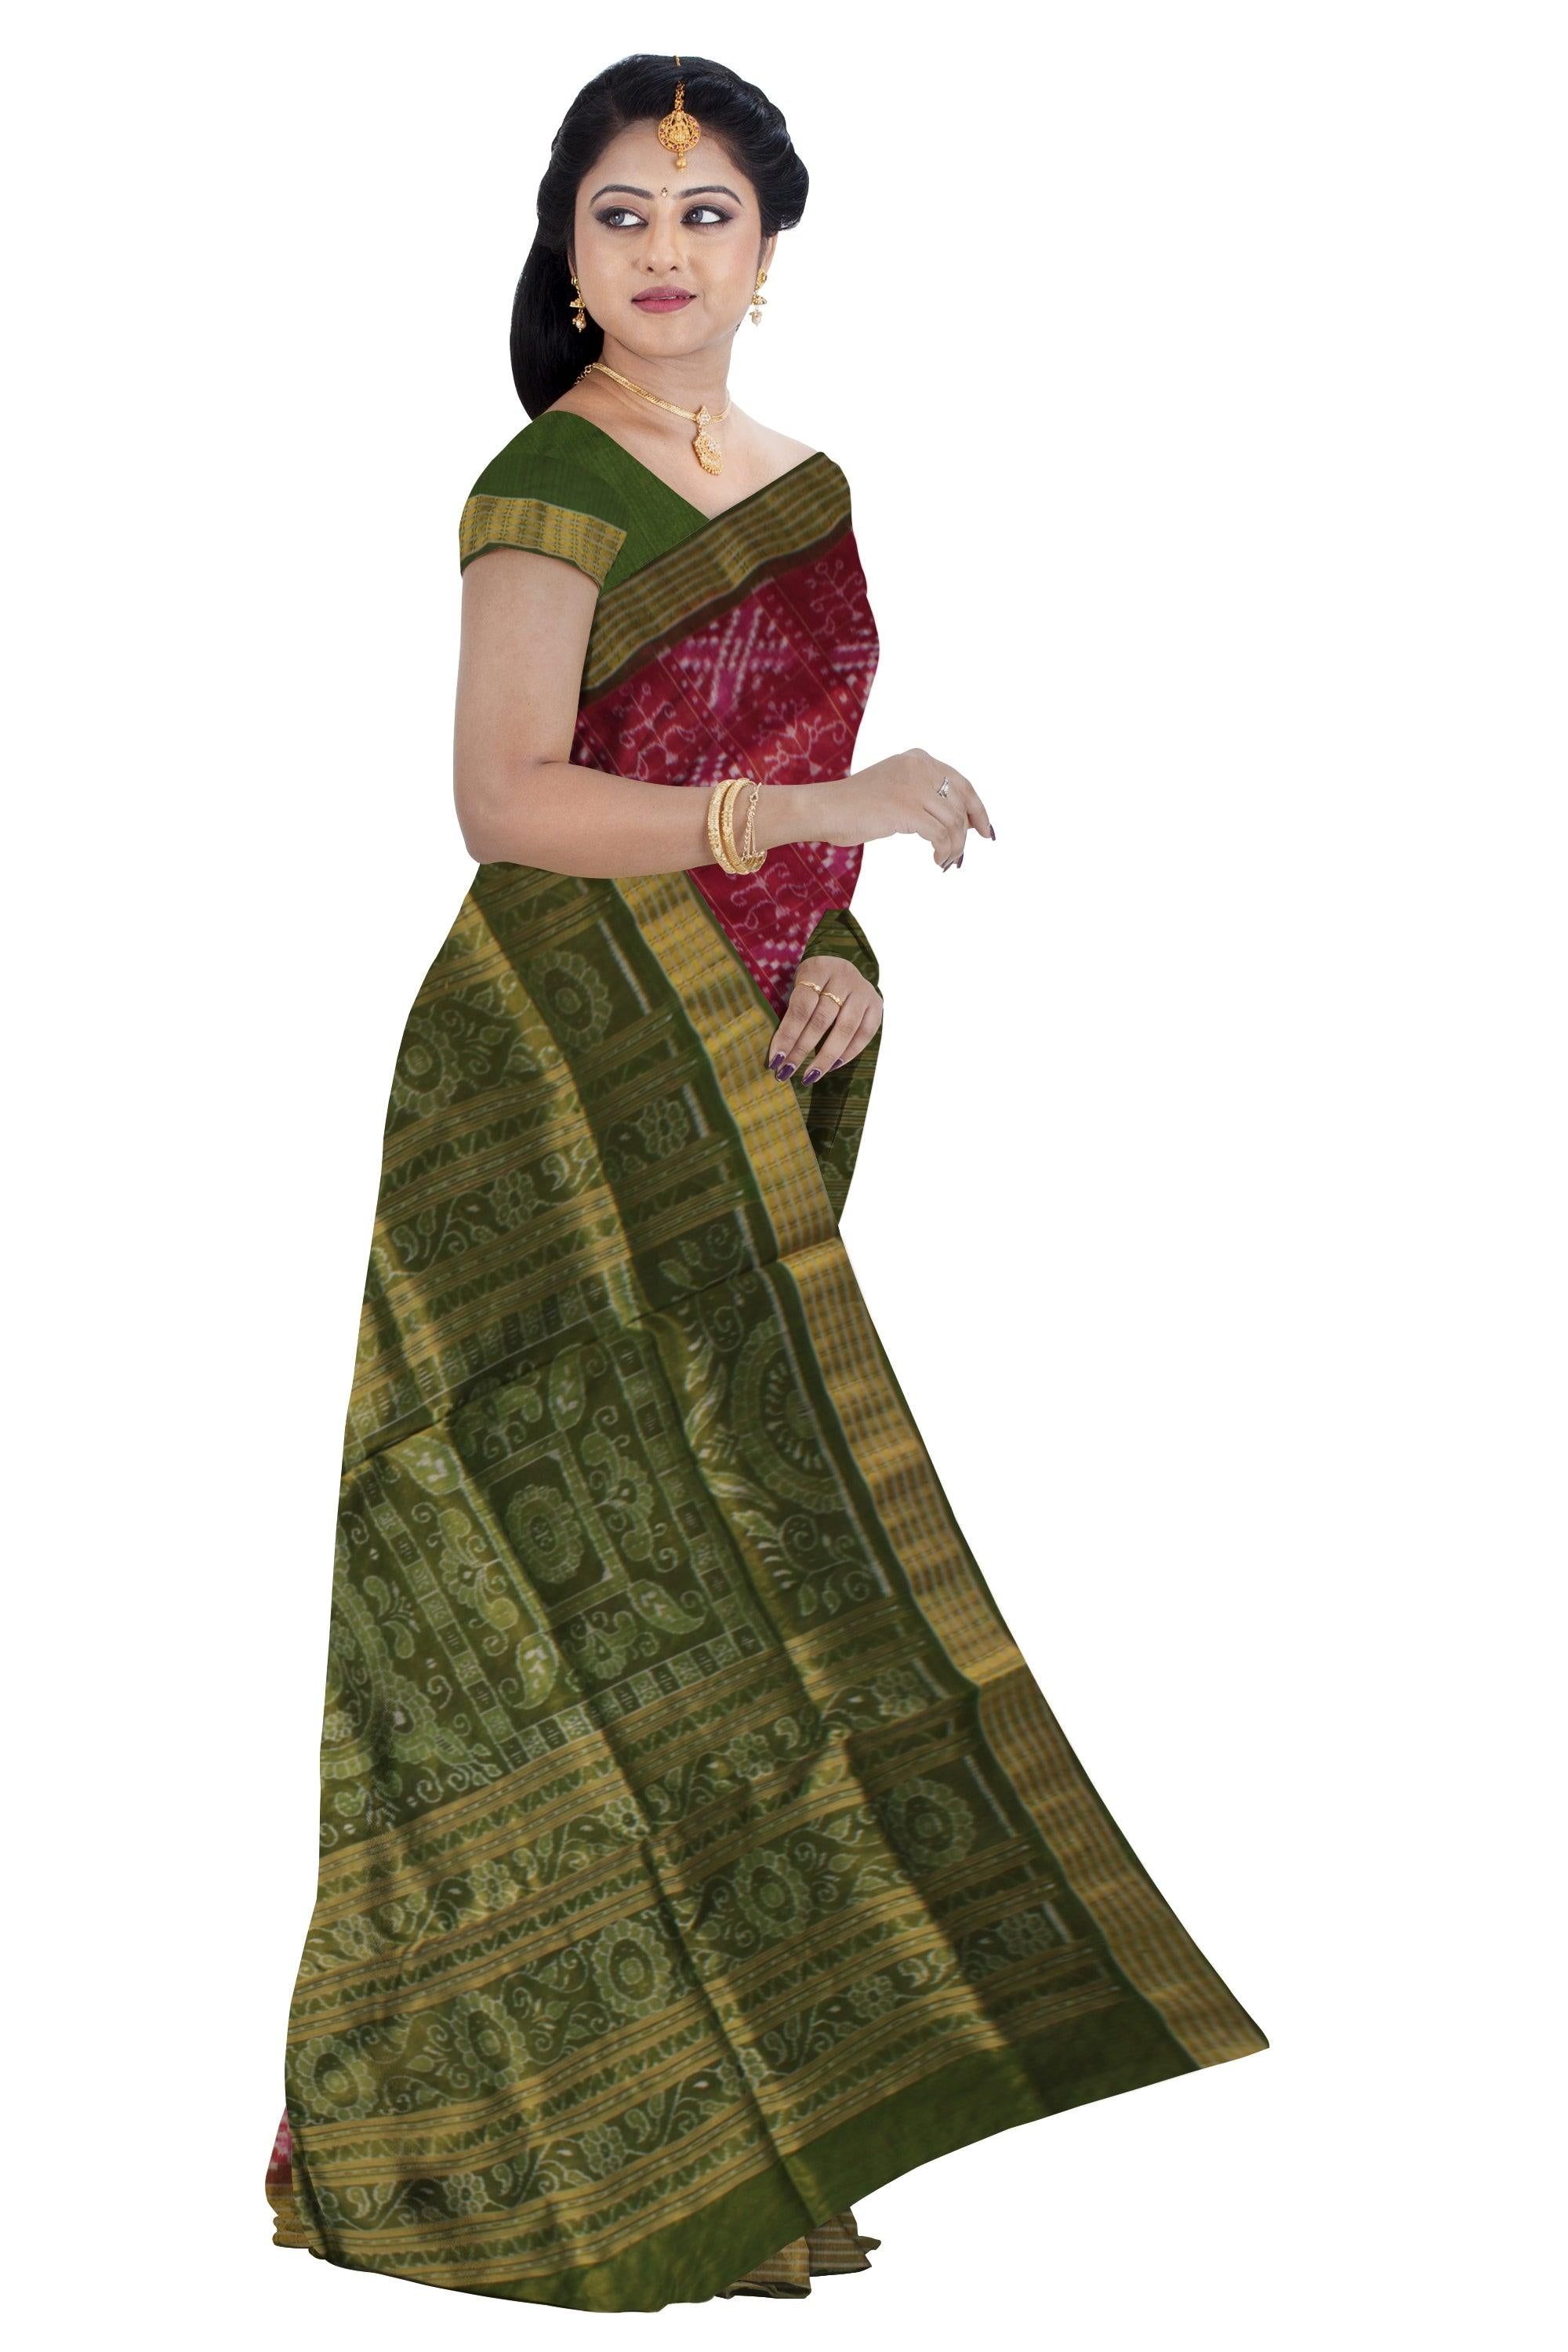 LATEST COLLECTION CROSS AND TREE PATTERN PURE TISSUE SILK SAREE IS  MAROON, PINK AND GREEN COLOR BASE, ATTACHED WITH MATCHING BLOUSE PIECE. - Koshali Arts & Crafts Enterprise